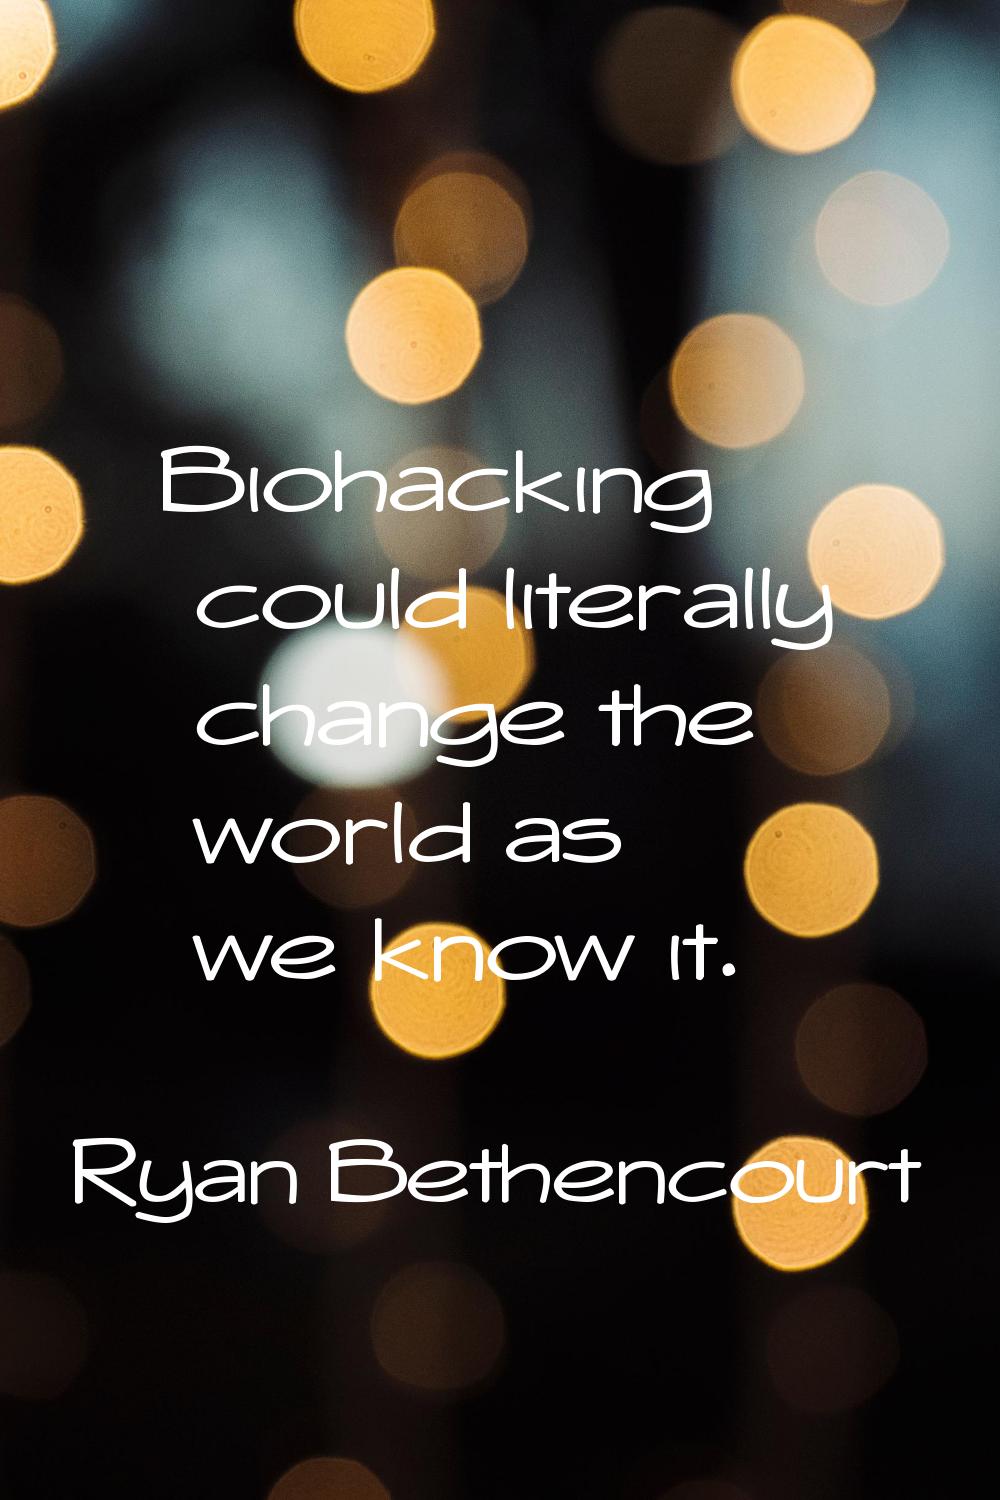 Biohacking could literally change the world as we know it.